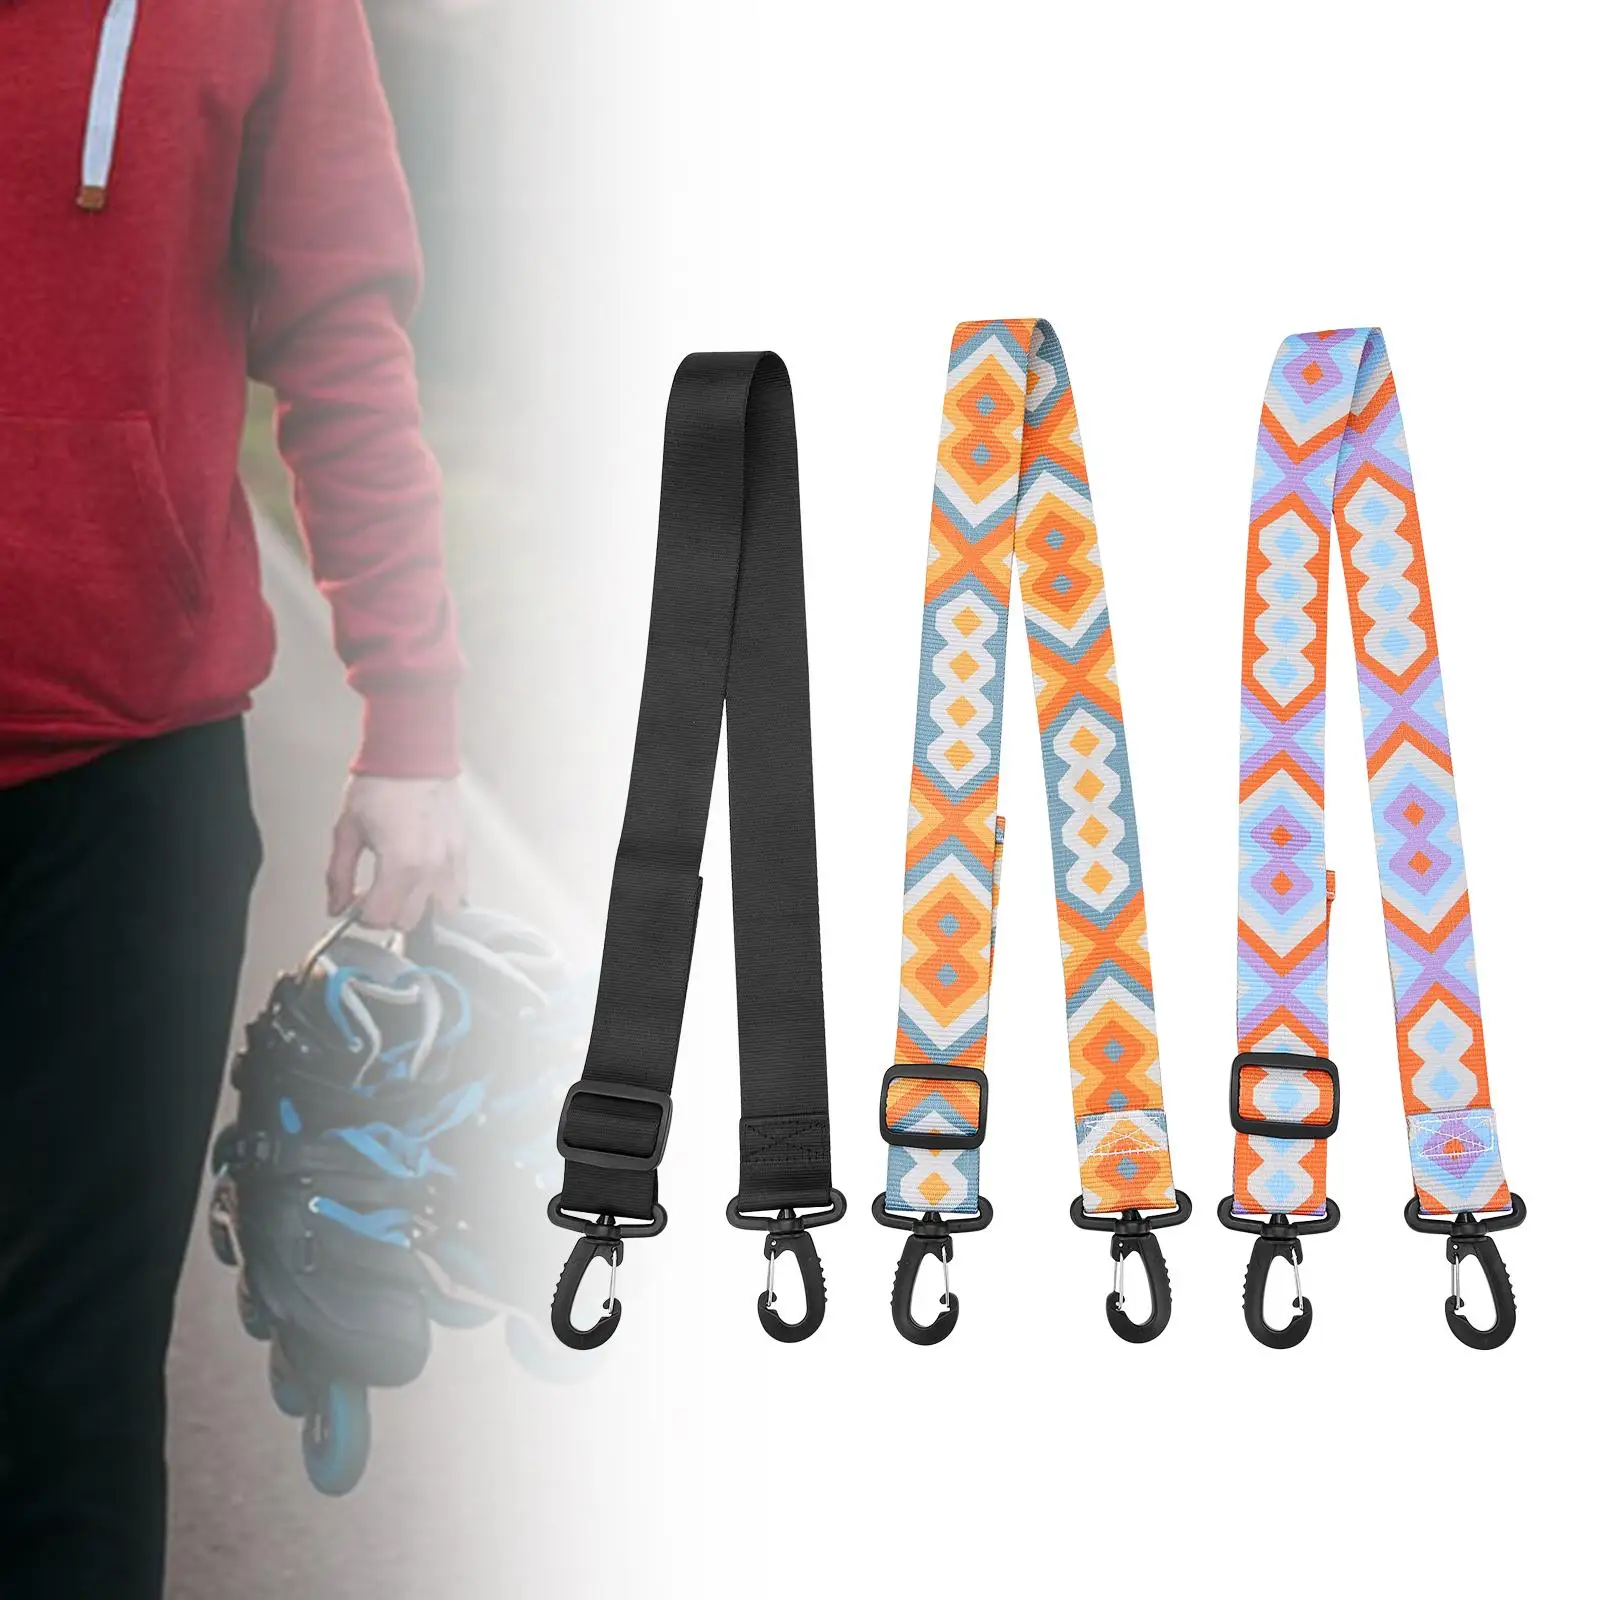 Ski Boot Strap Roller Skating Carrying Tool Snowboard Strap with Hook Ski Boot Carrier Straps for Skiing Bags Accessories